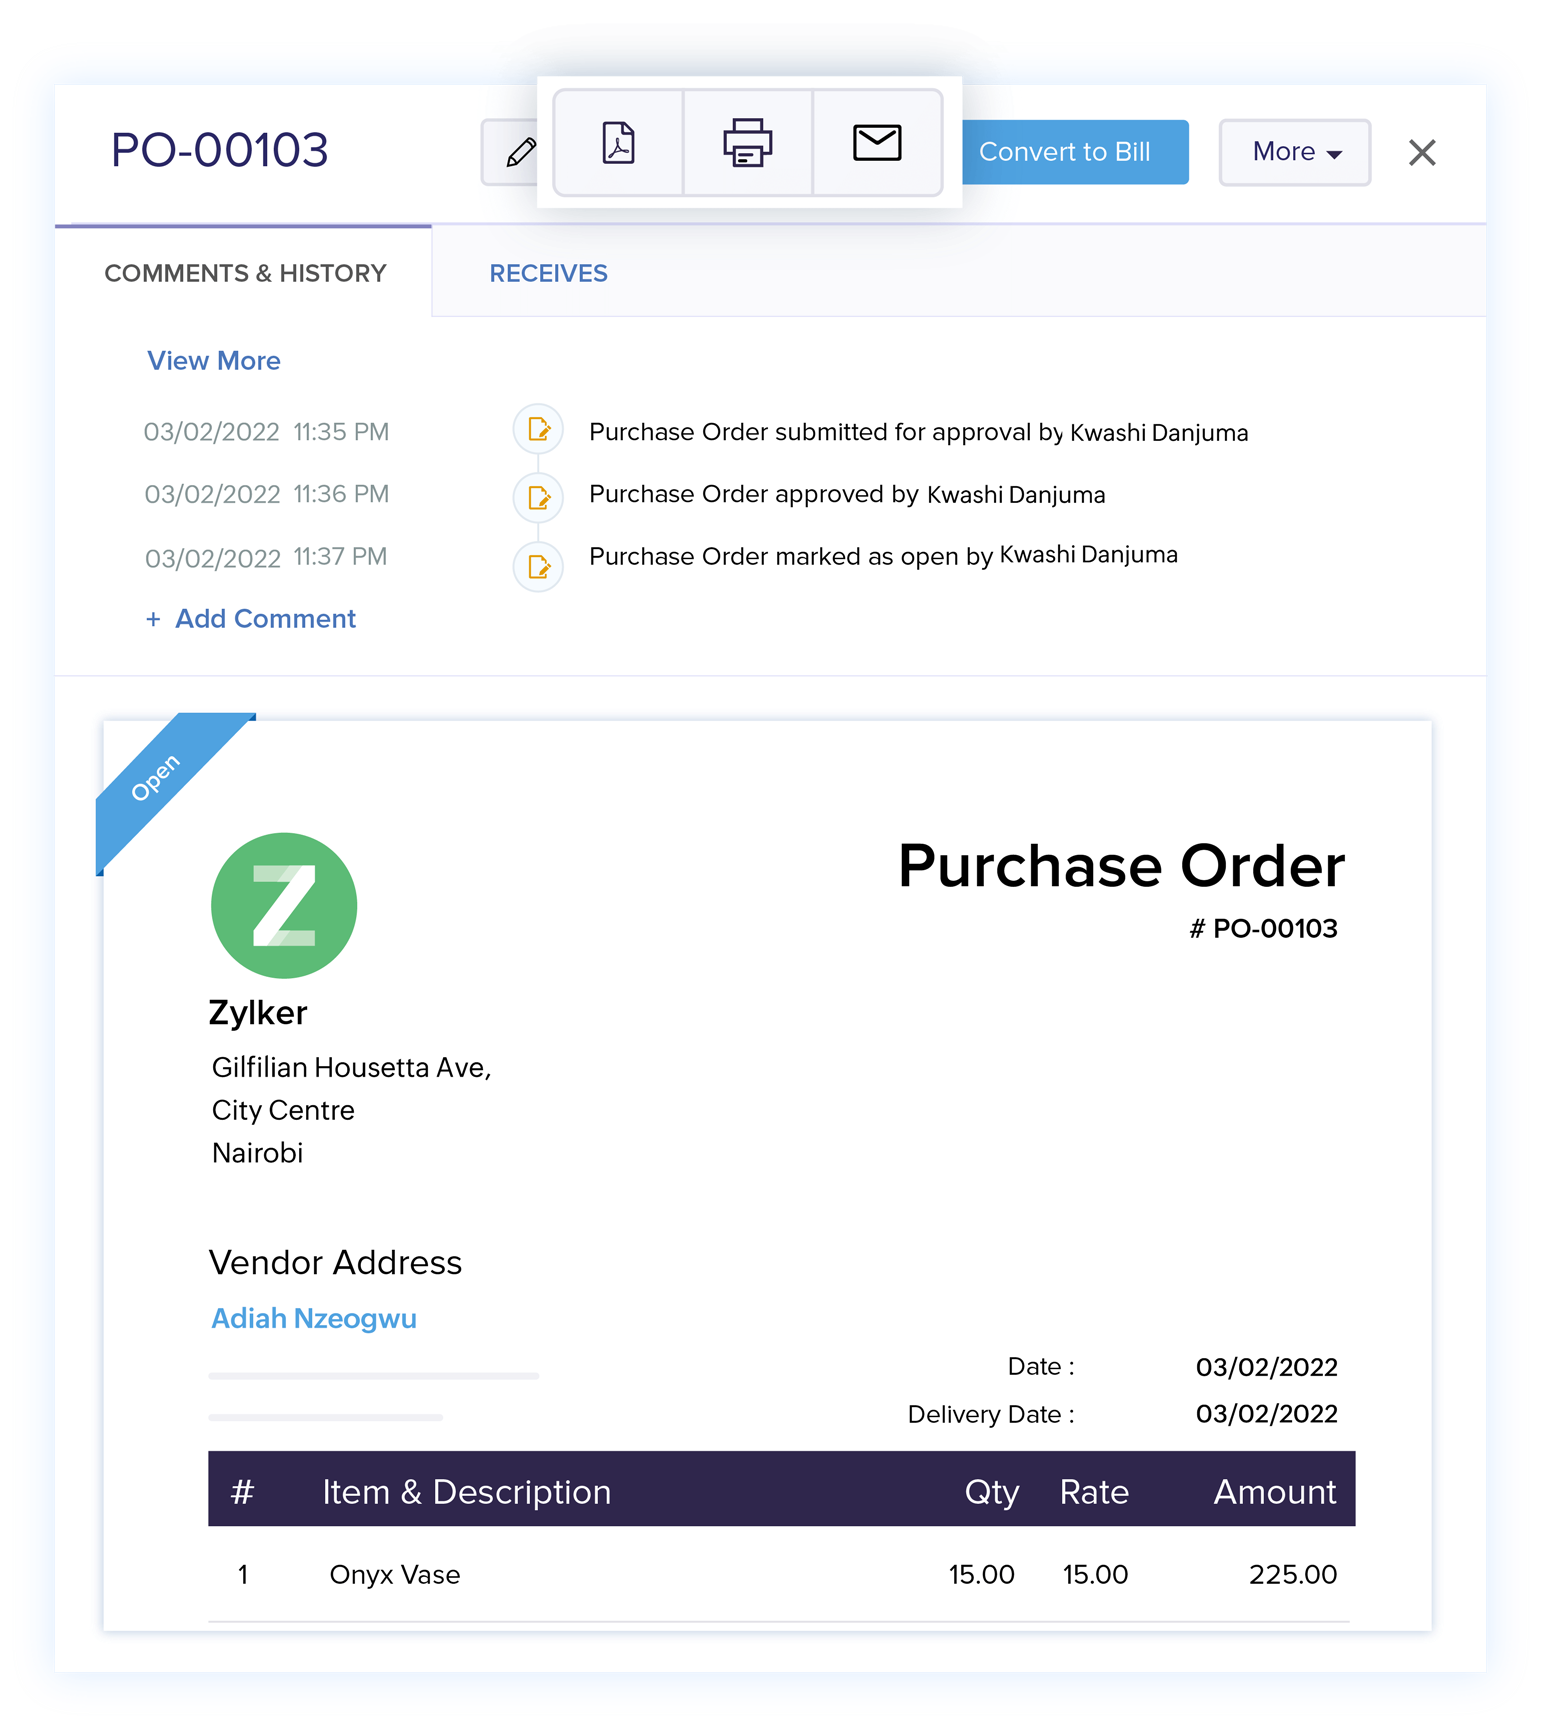 Share Purchase Orders - Best Purchase Order Software | Zoho Books